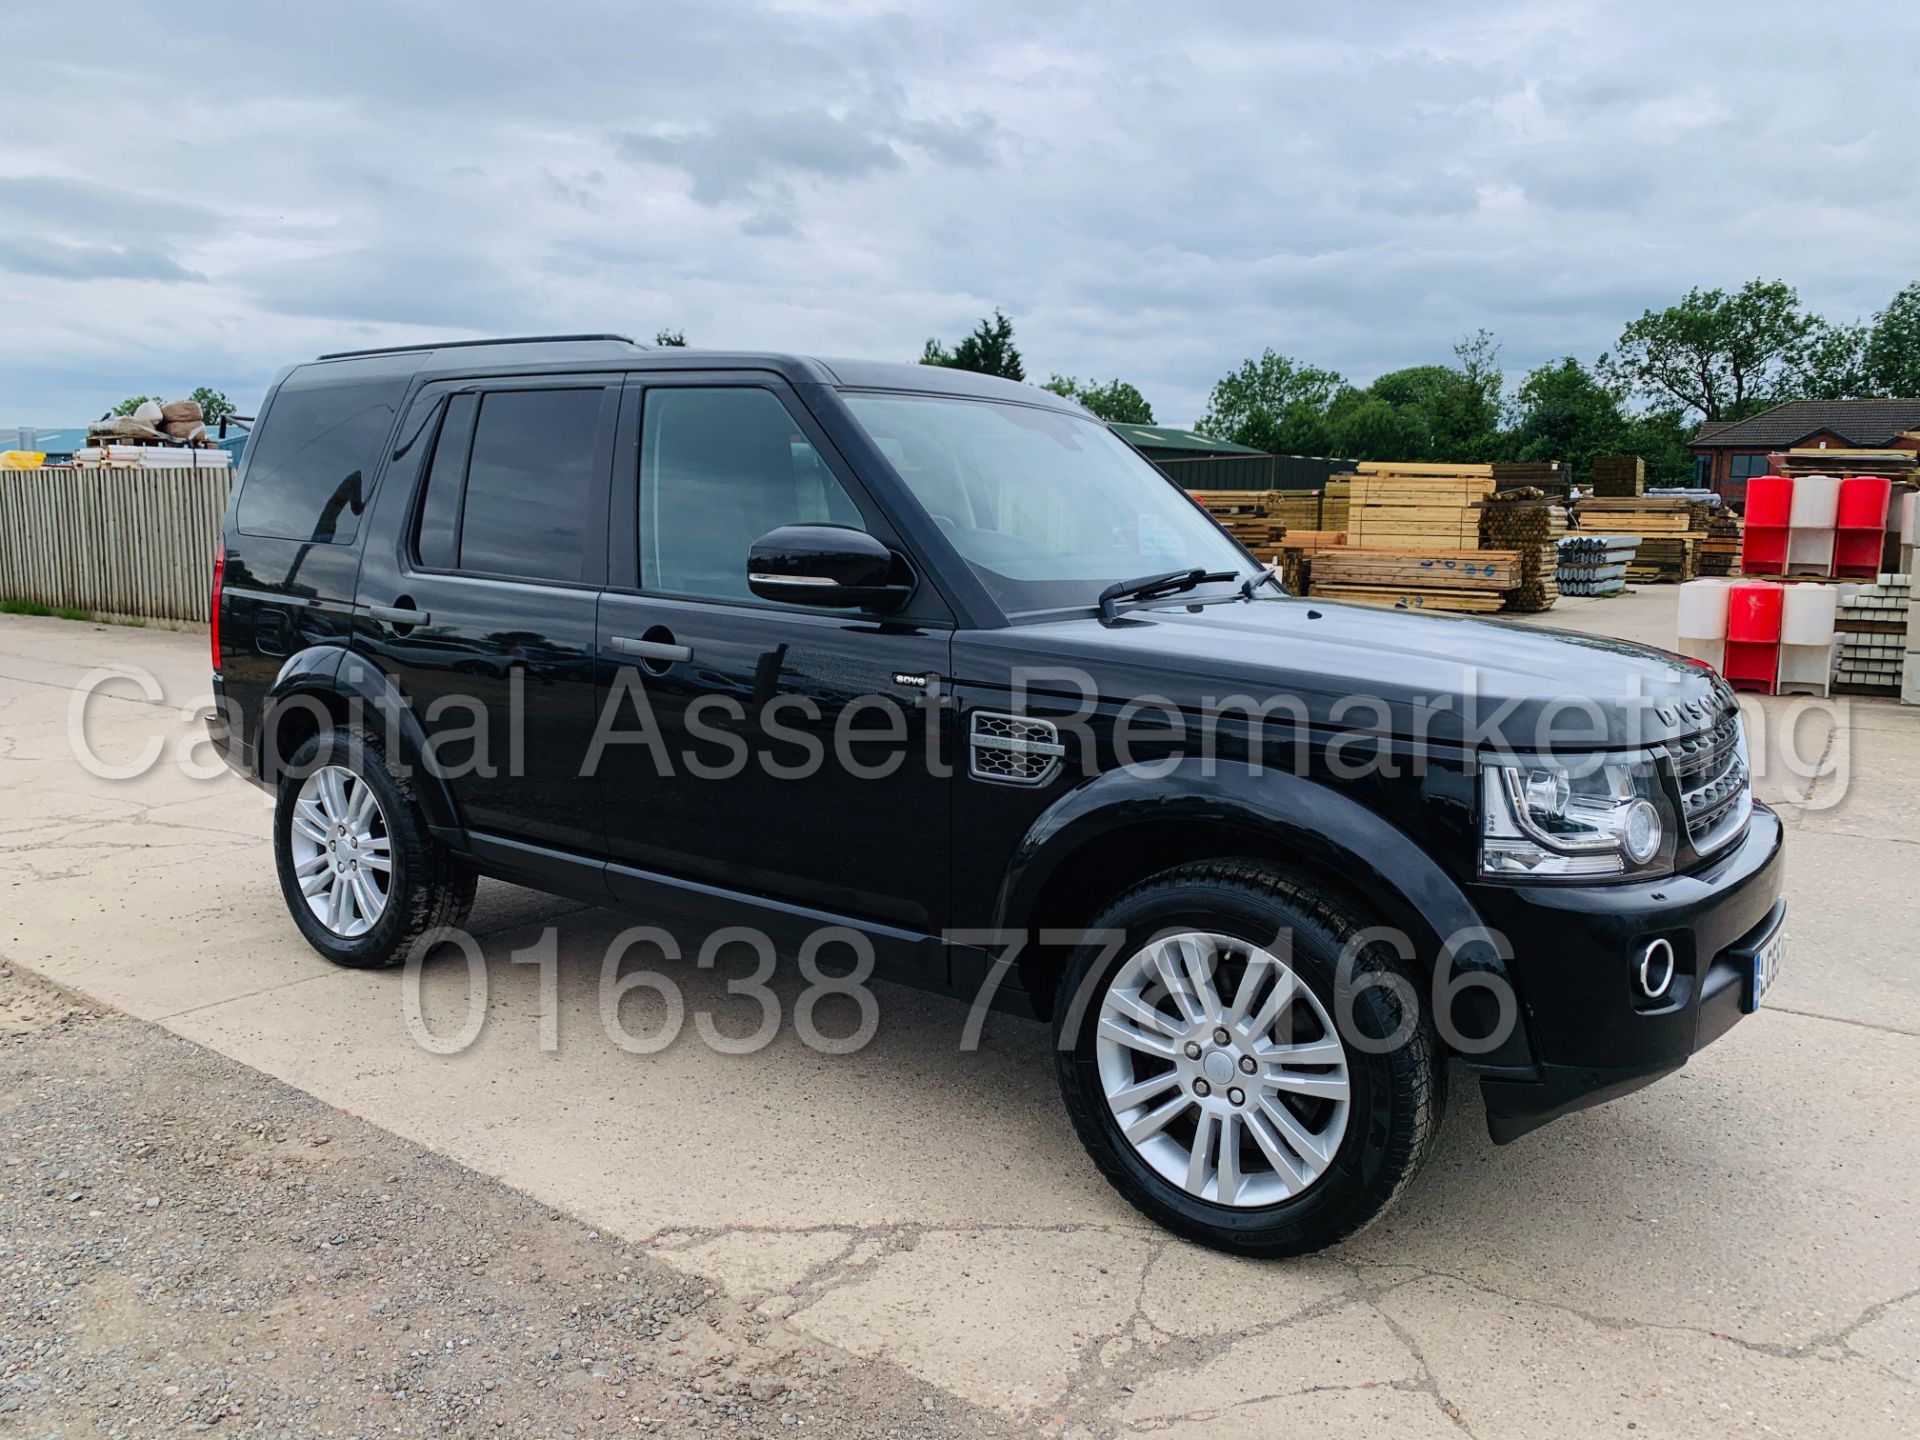 (On Sale) LAND ROVER DISCOVERY 4 *SE TECH* 7 SEATER SUV (2016) '3.0 SDV6 - 8 SPEED AUTO' (1 OWNER) - Image 2 of 53